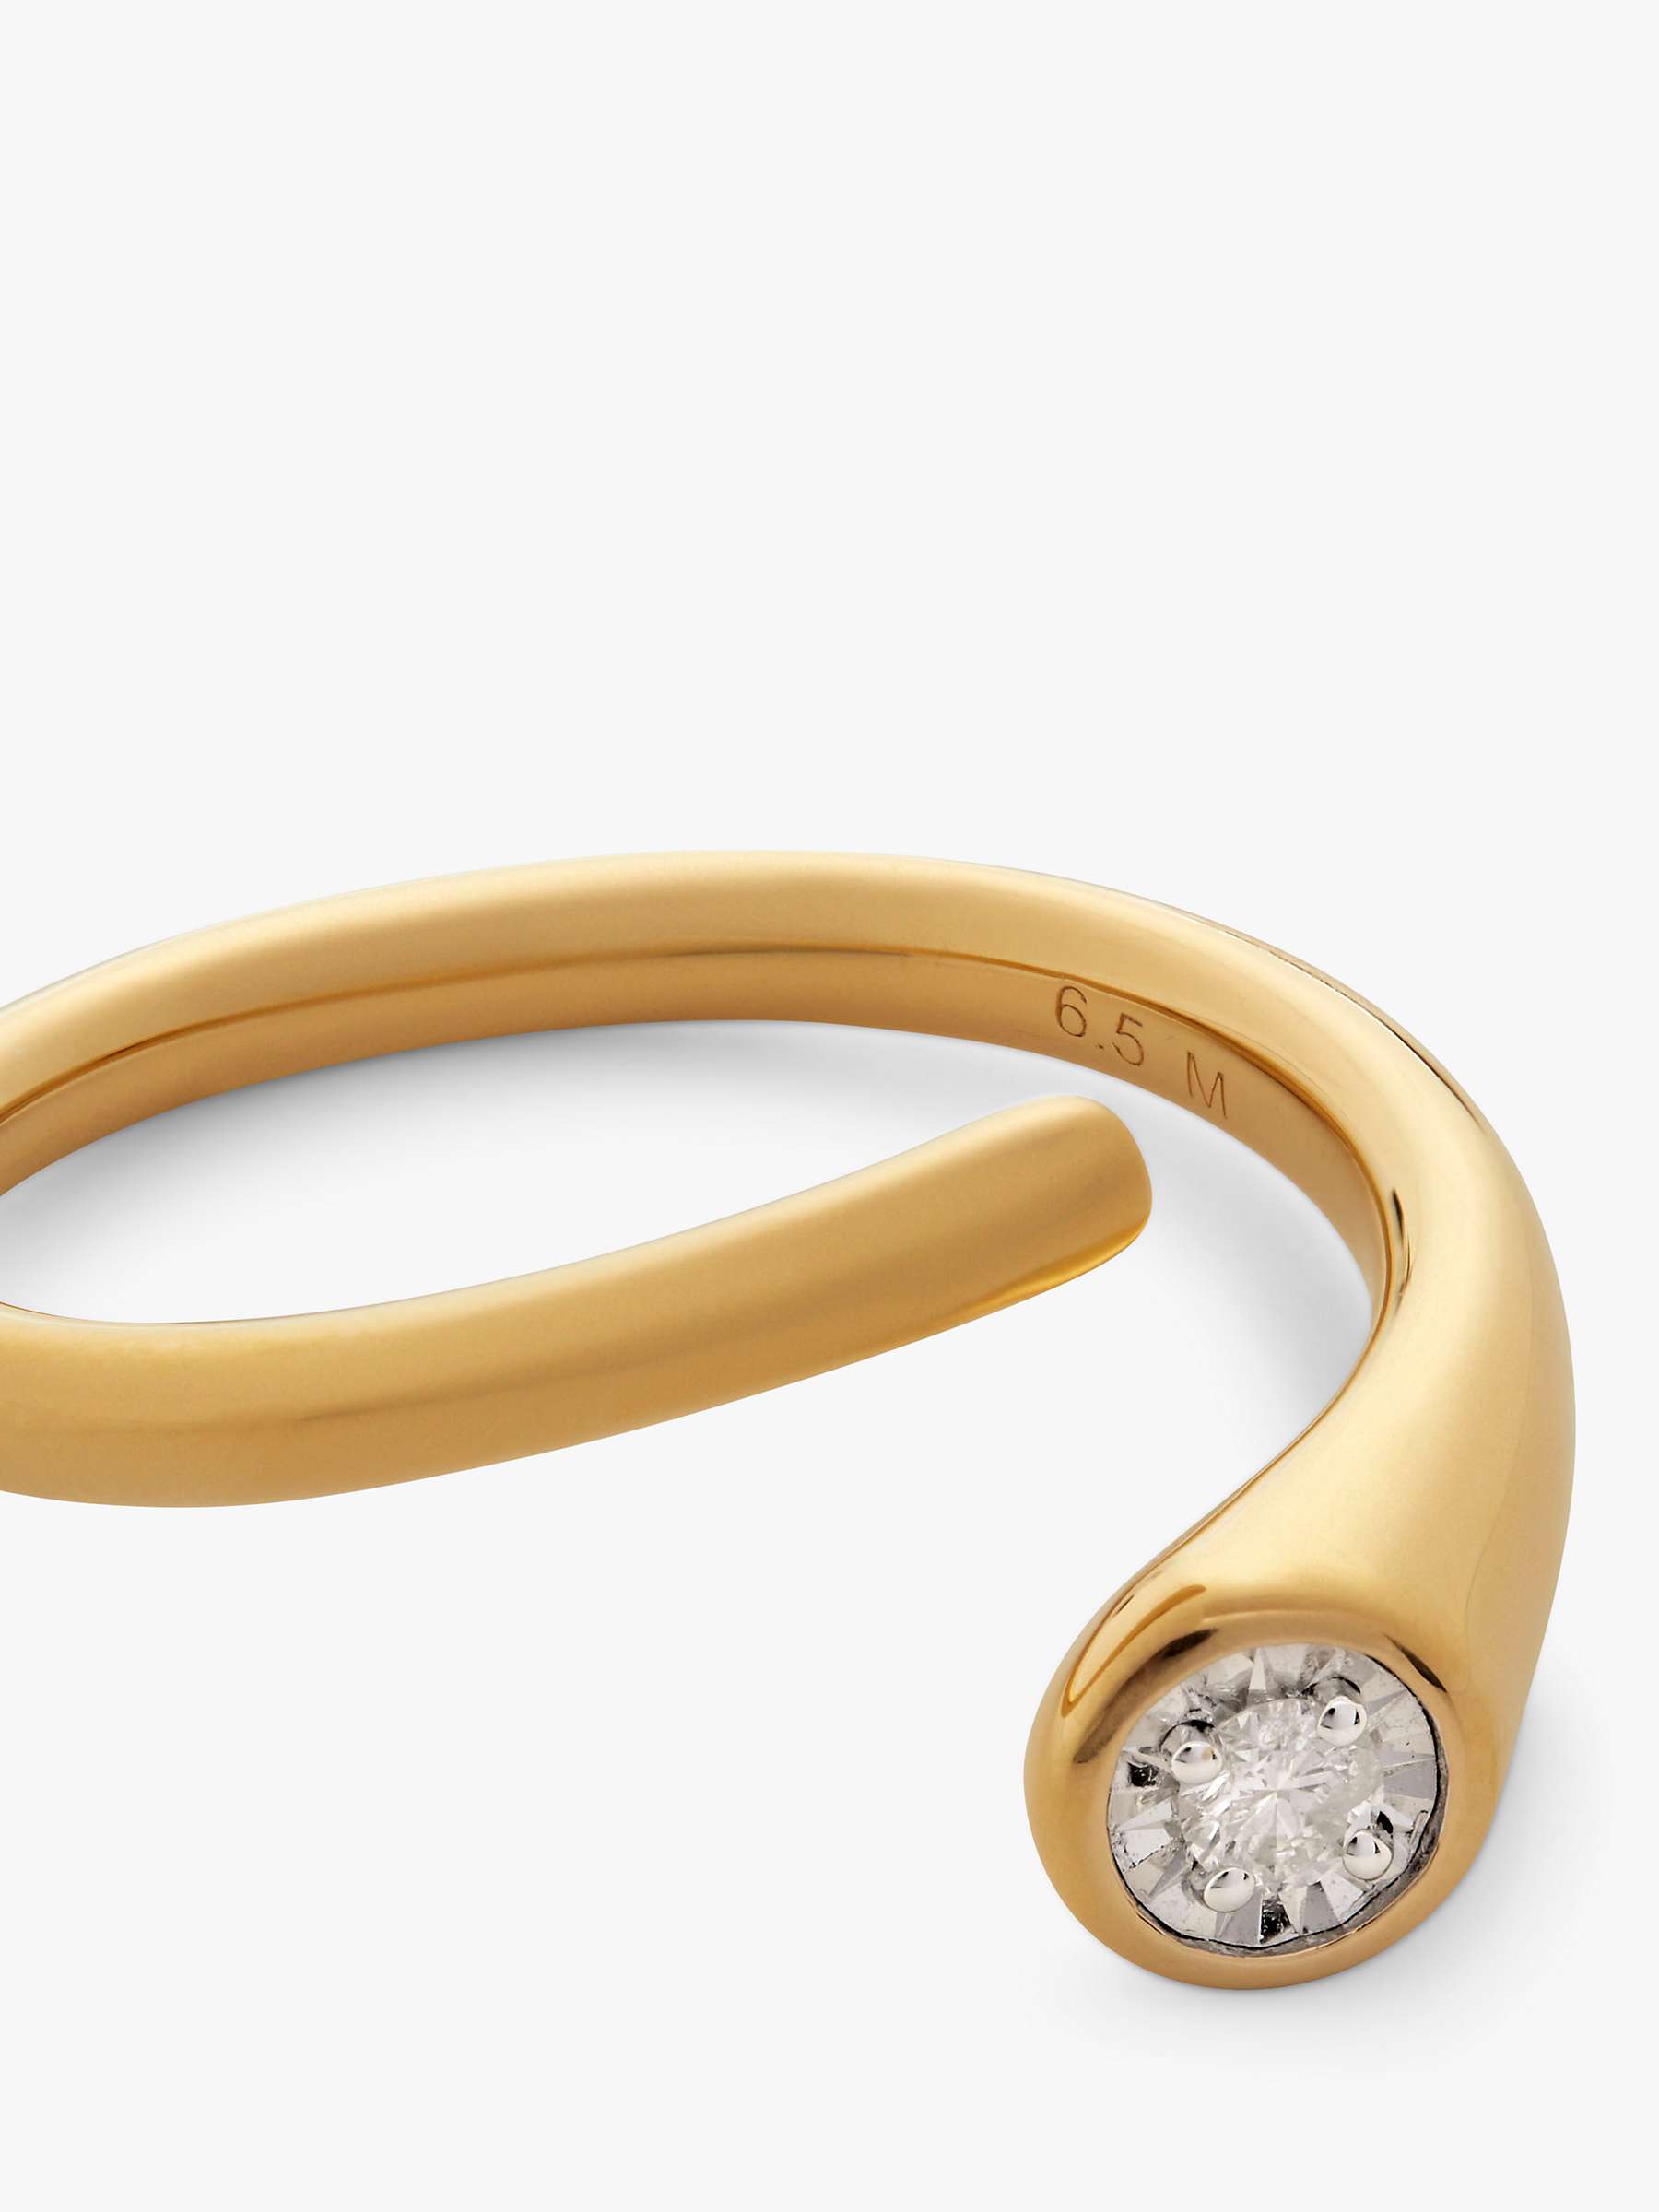 Buy Monica Vinader Solitaire Diamond Wrap Ring, Gold Online at johnlewis.com